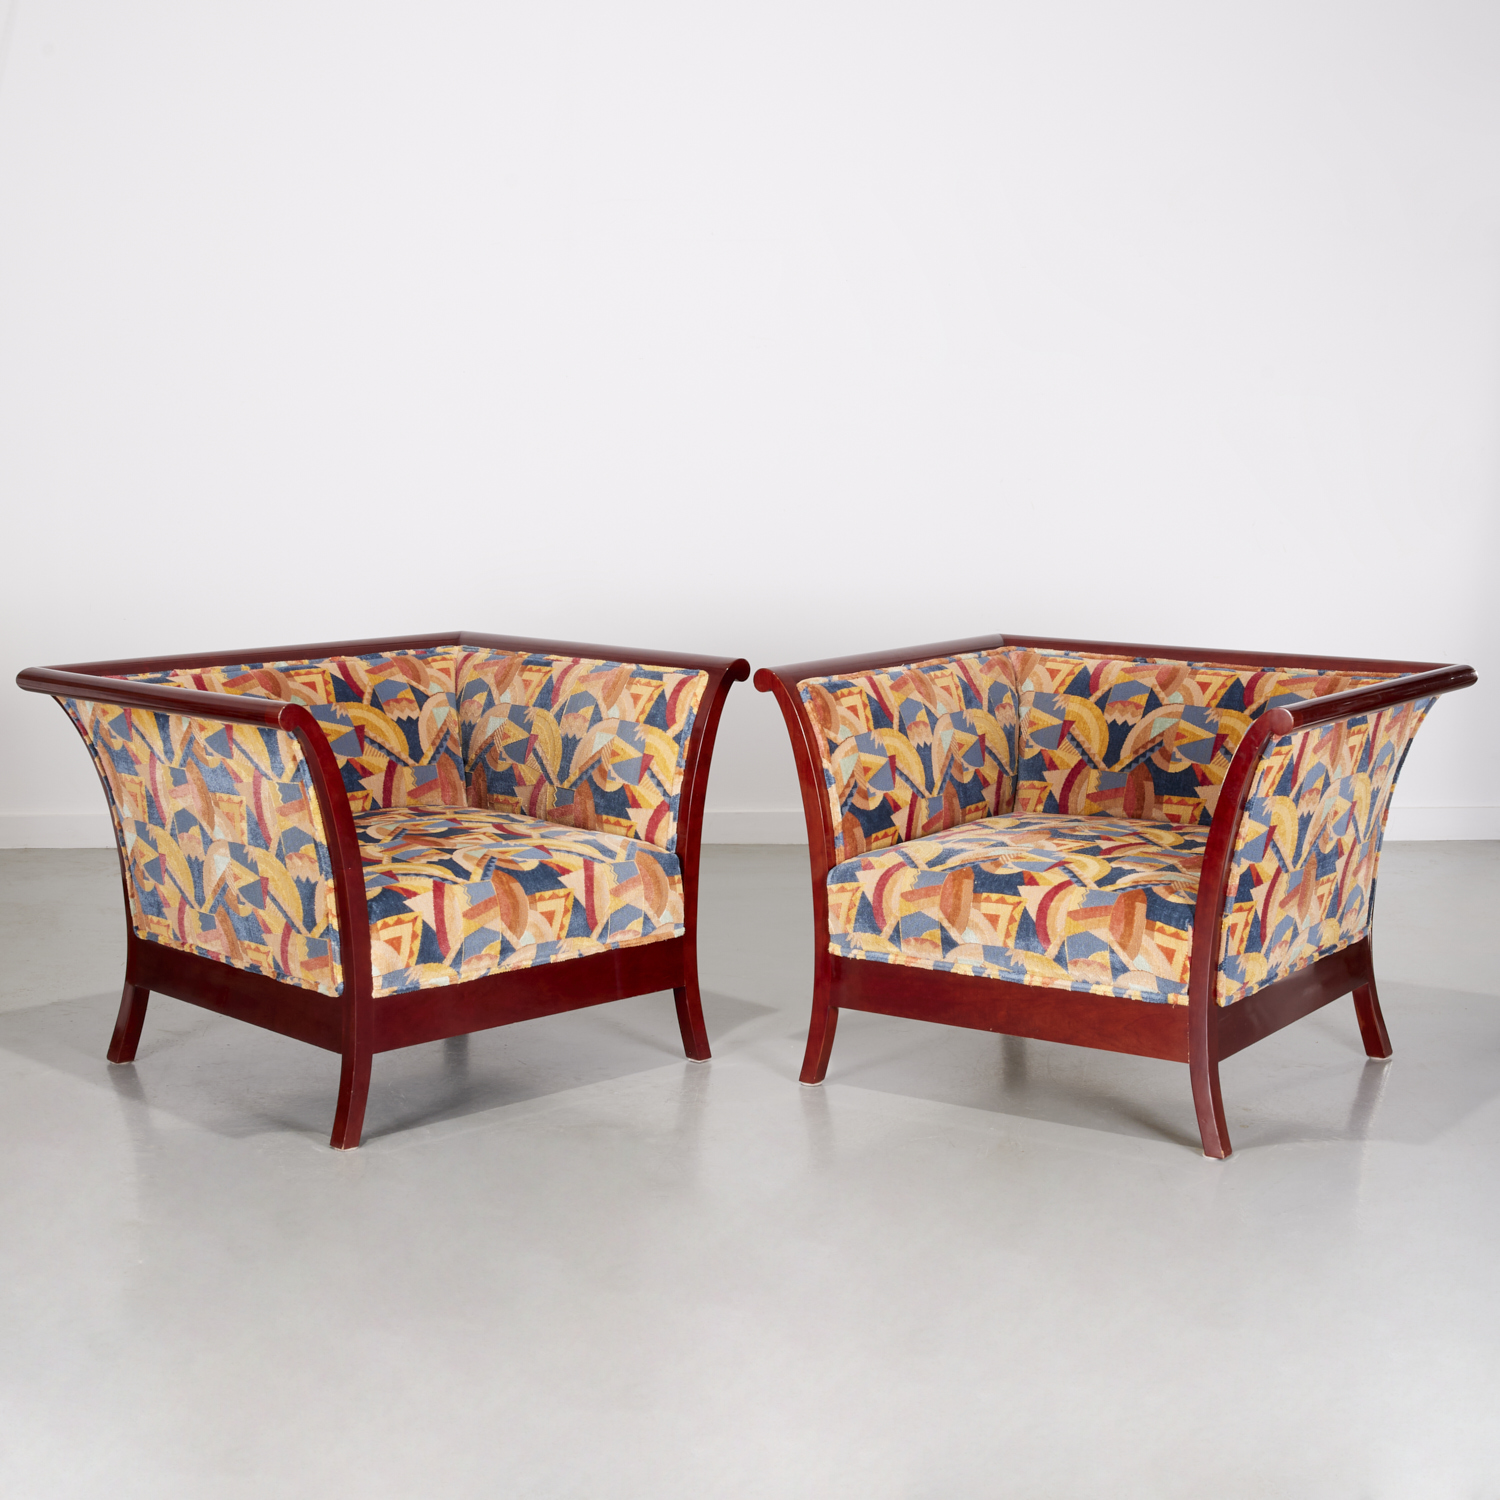 PAIR SECESSIONIST STYLE UPHOLSTERED 2fb9af